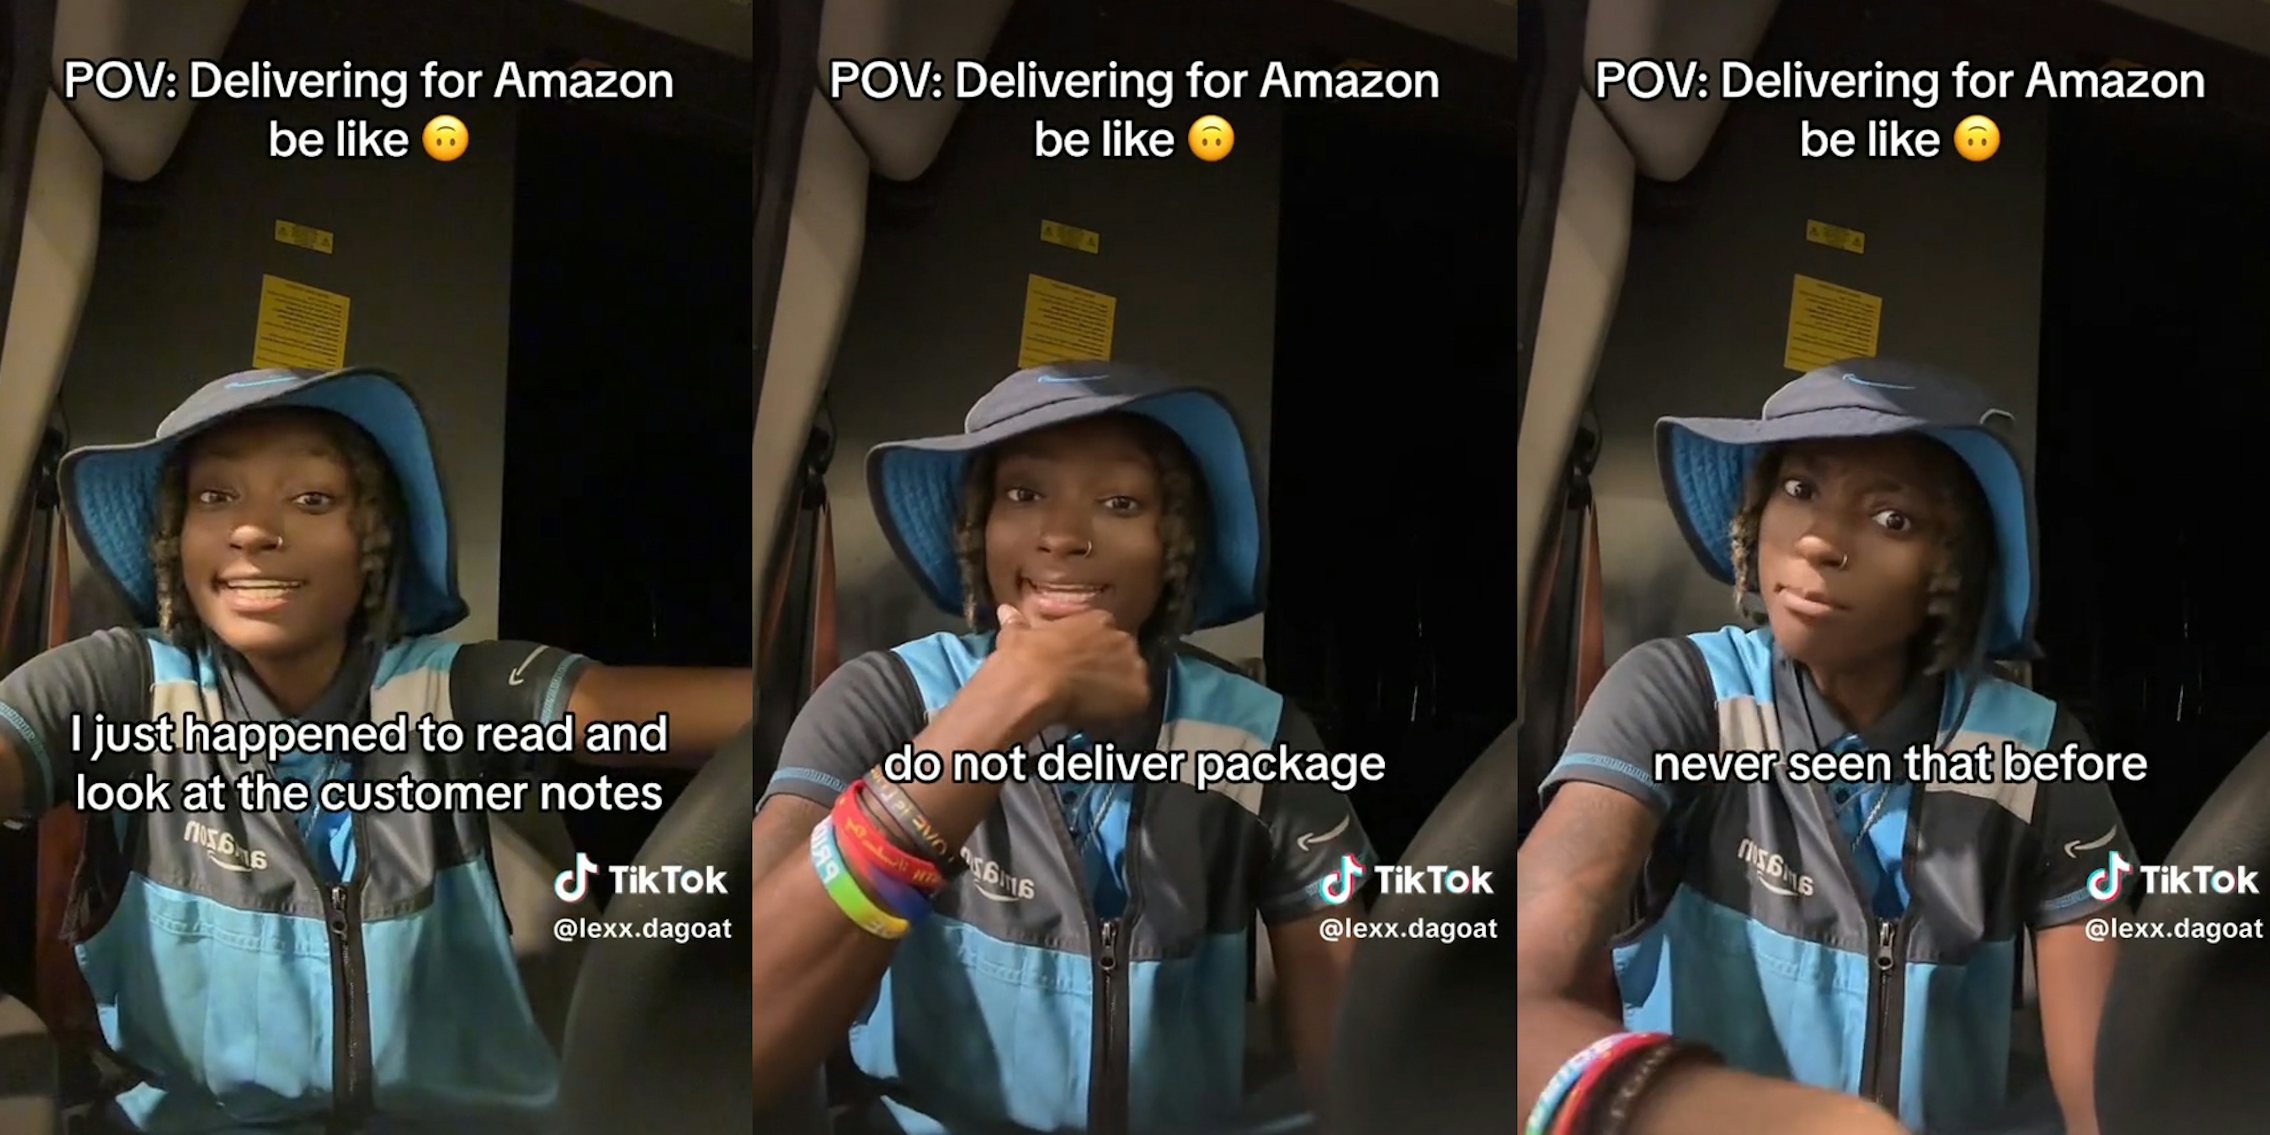 amazon driver with caption 'POV: Delivering for Amazon be like' 'I just happened to read and look at the customer notes - do not deliver package - never seen that before'